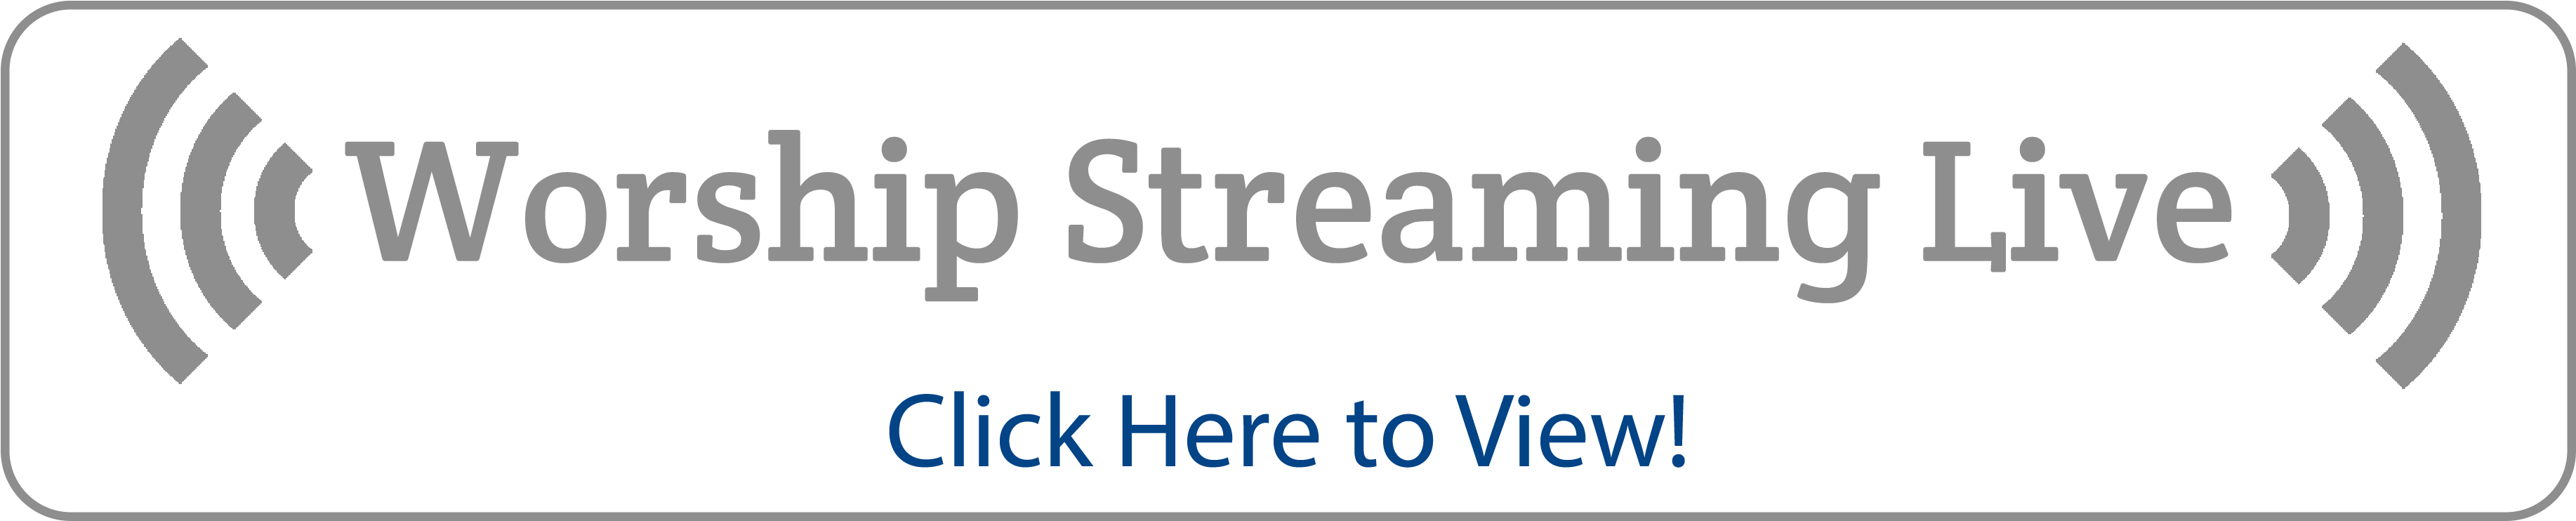 Live Worship Streaming Button PNG